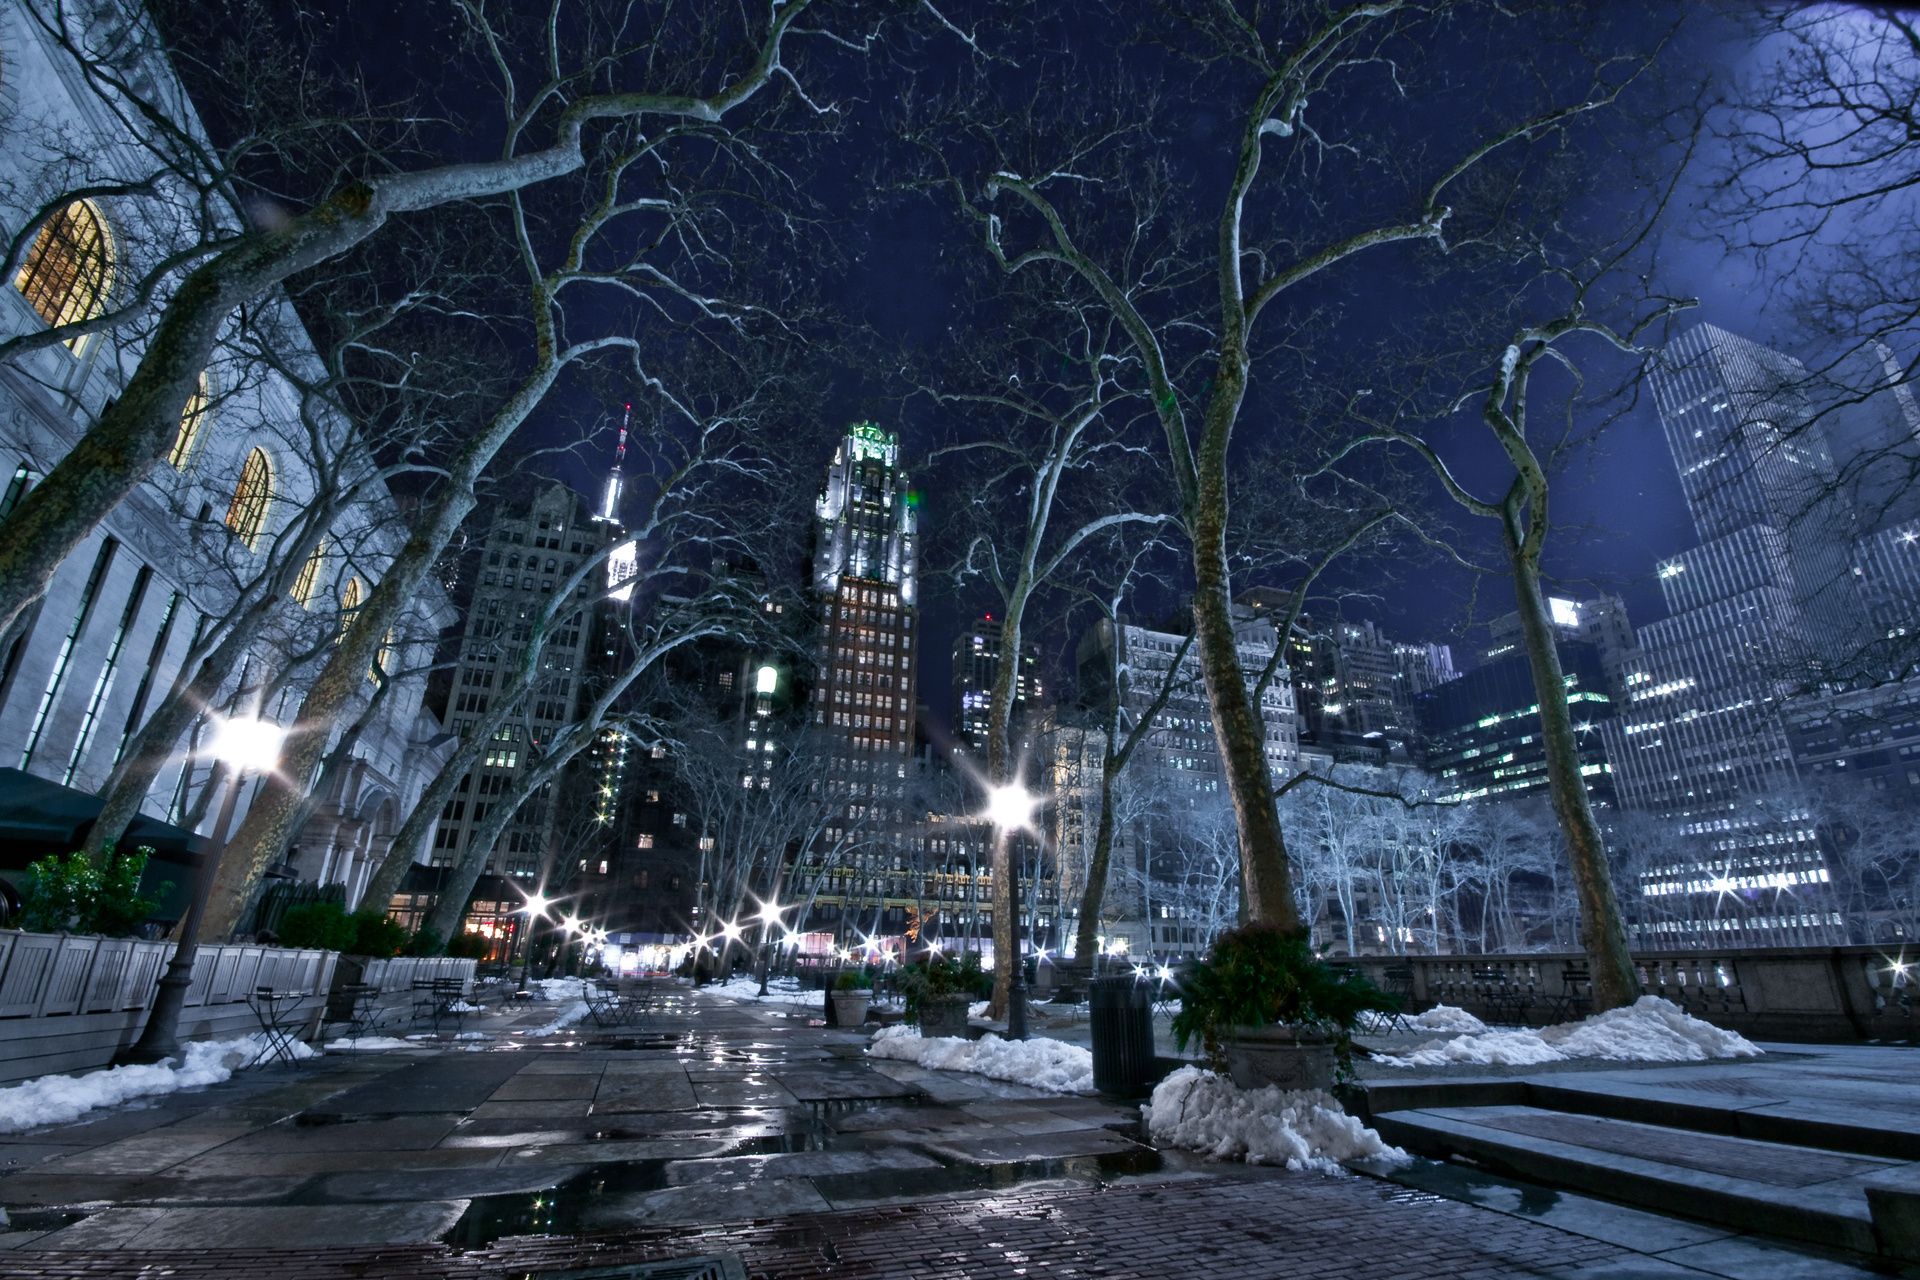 Wallpaper. Cities. photo. picture. New York, the city, winter, night, lights